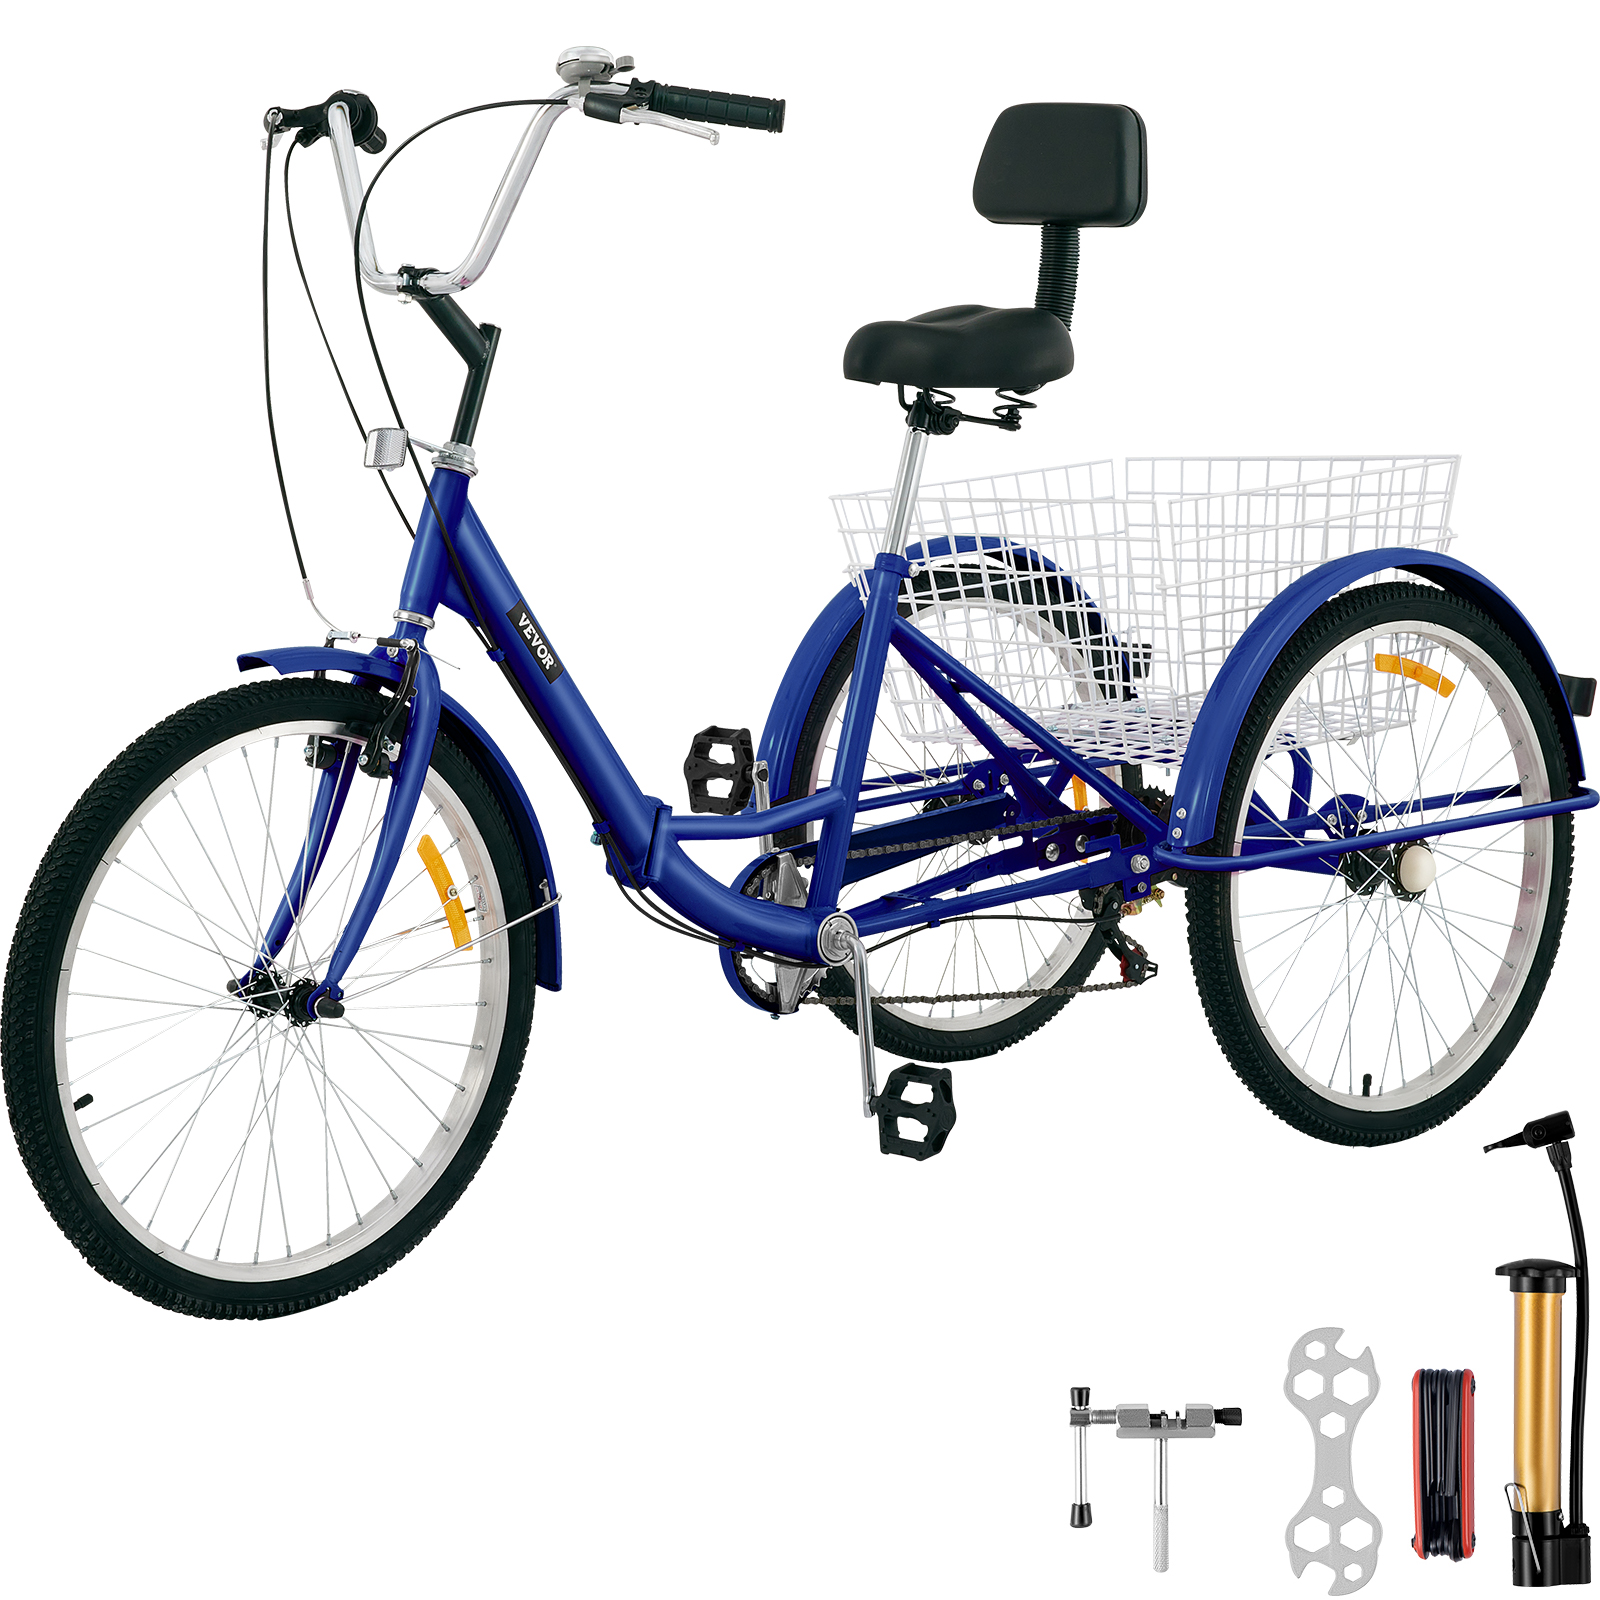 VEVOR Foldable Tricycle 26" Wheels, 7-Speed Trike, 3 Wheels Colorful Bike with Basket, Portable and Foldable Bicycle for Adults Exercise Shopping Picnic Outdoor Activities - image 1 of 9